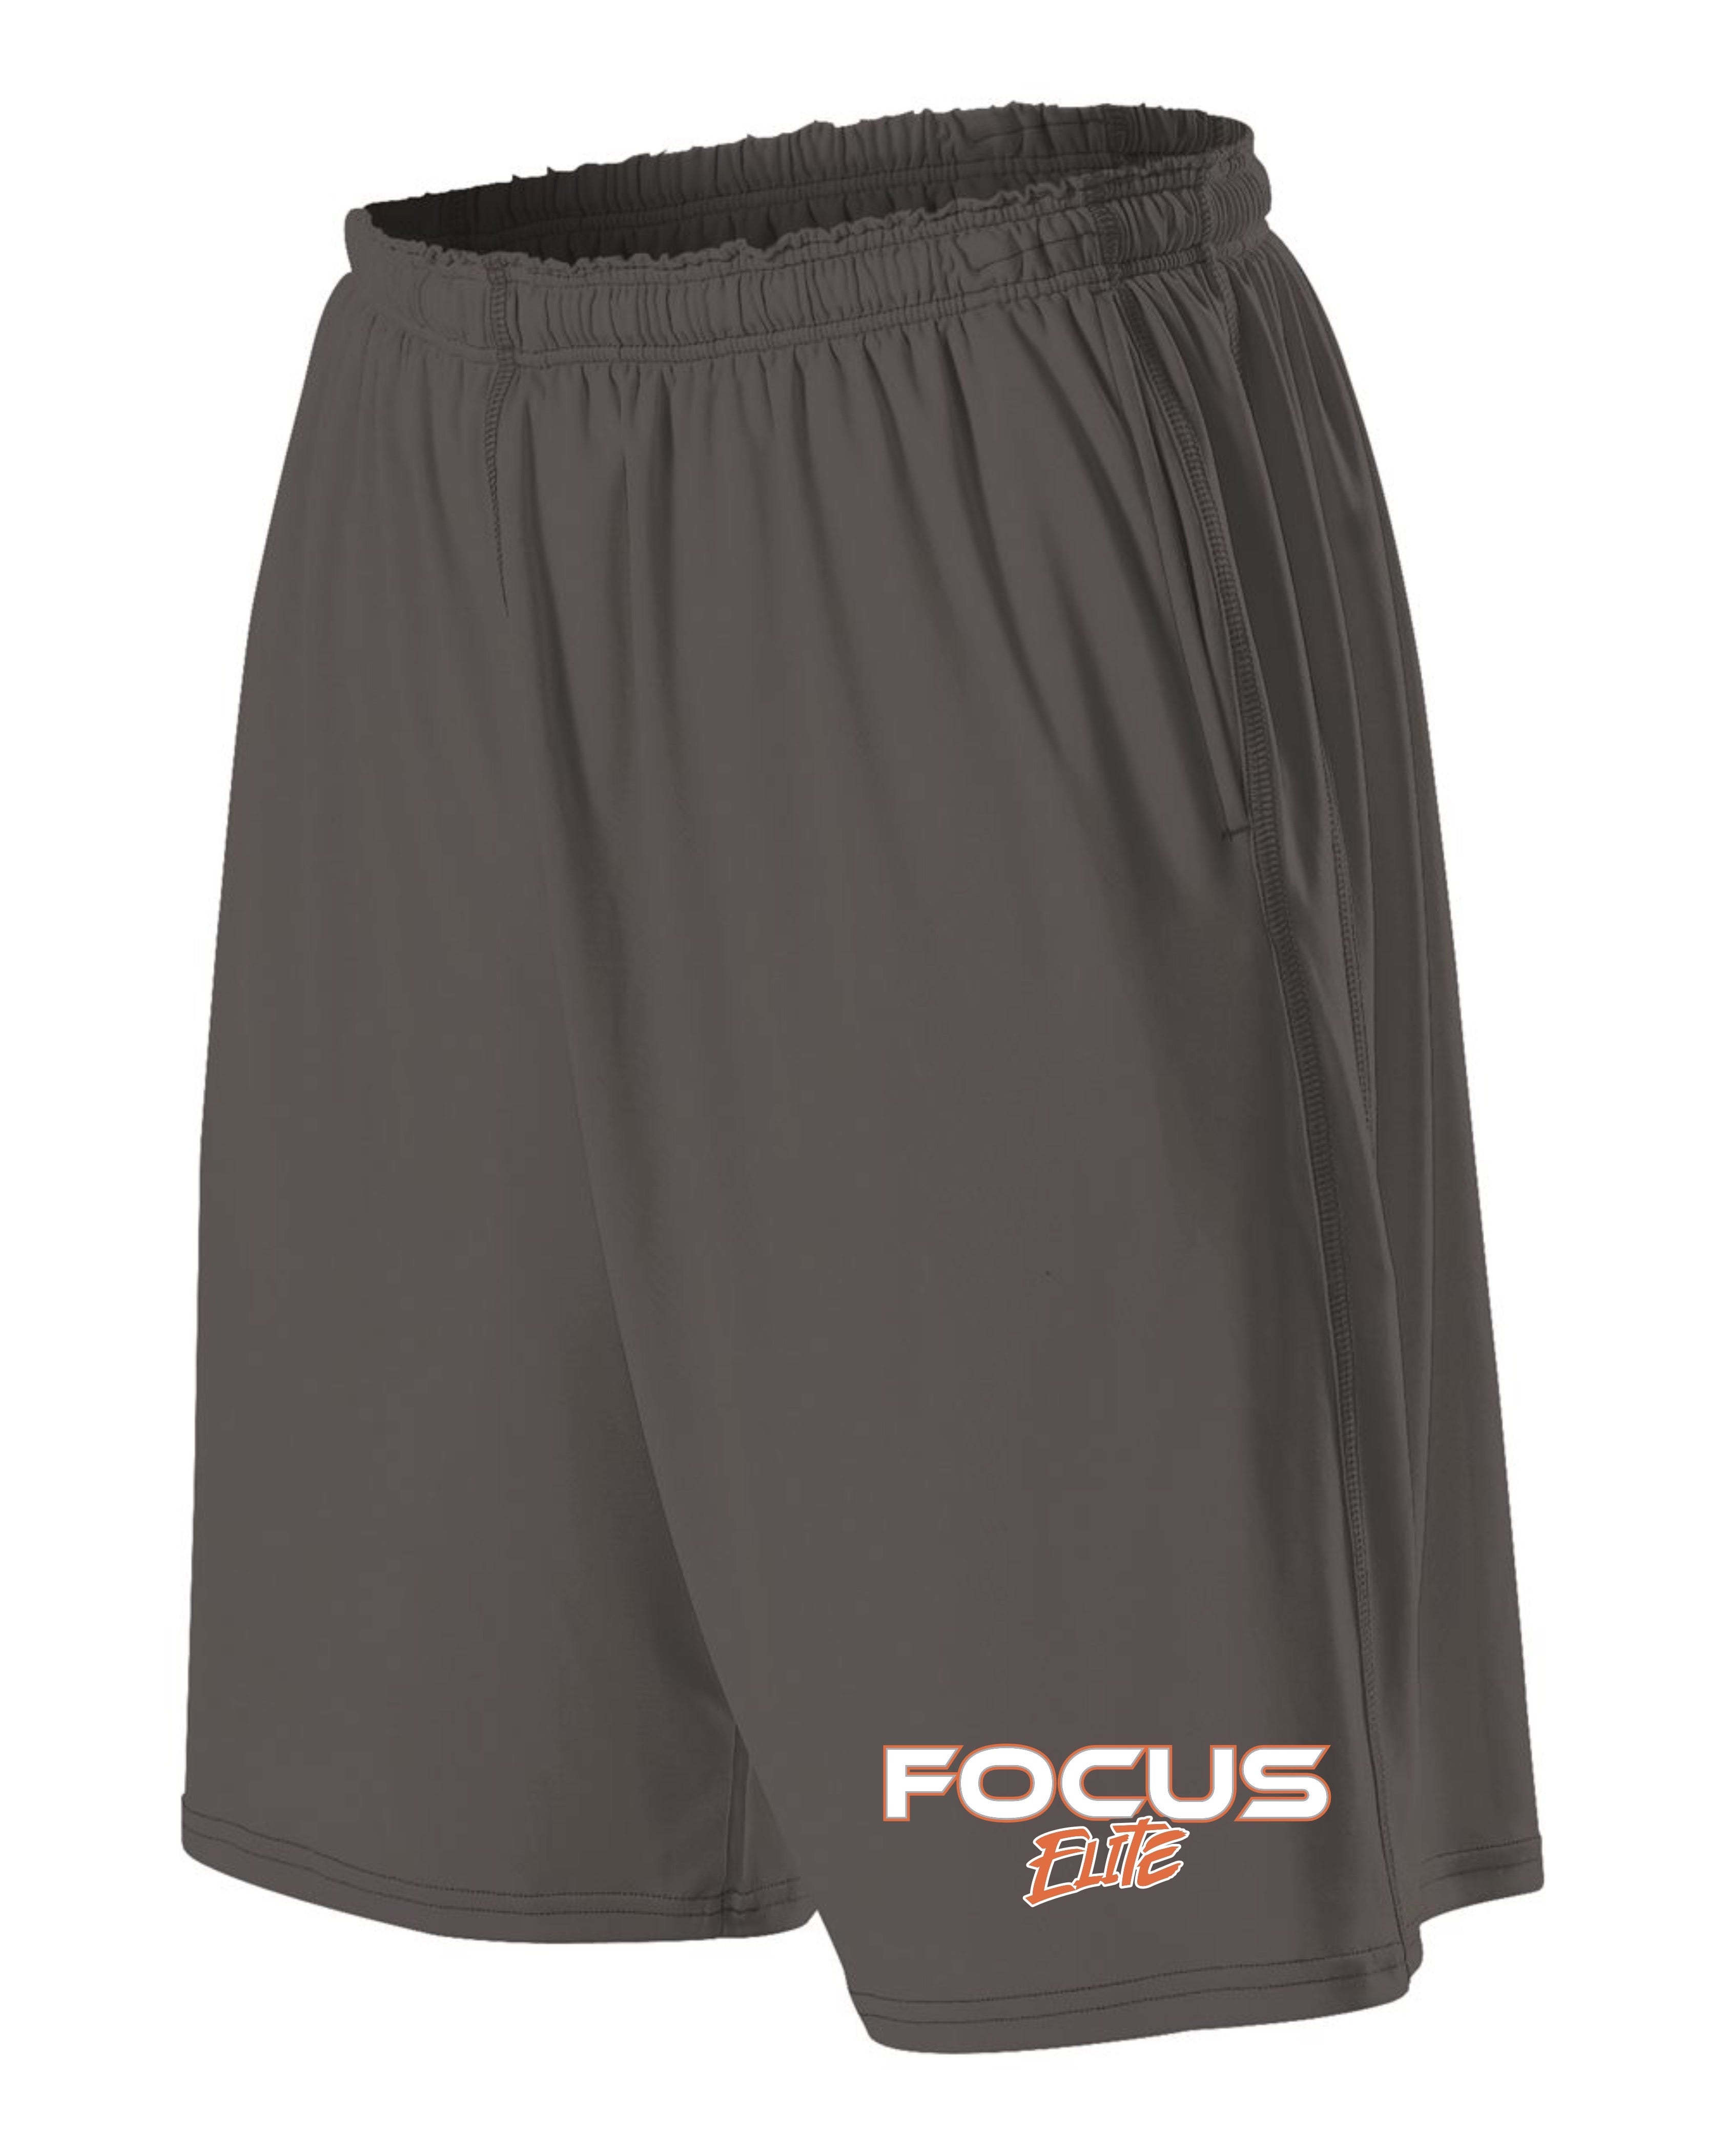 Focus Shorts - Dri Fit - Youth